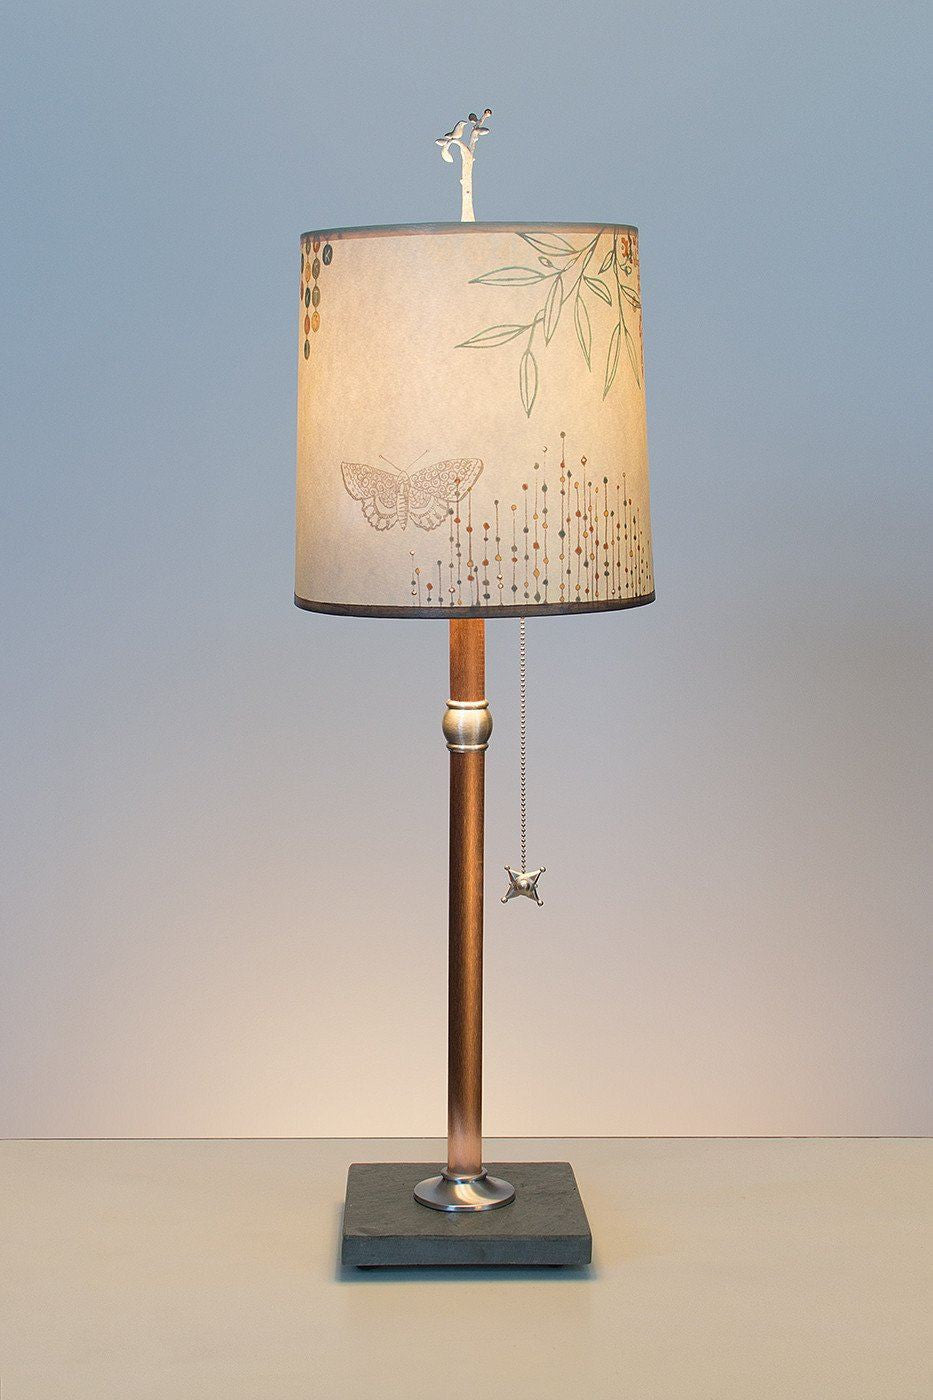 Janna Ugone & Co Table Lamps Copper Table Lamp with Medium Drum Shade in Ecru Journey